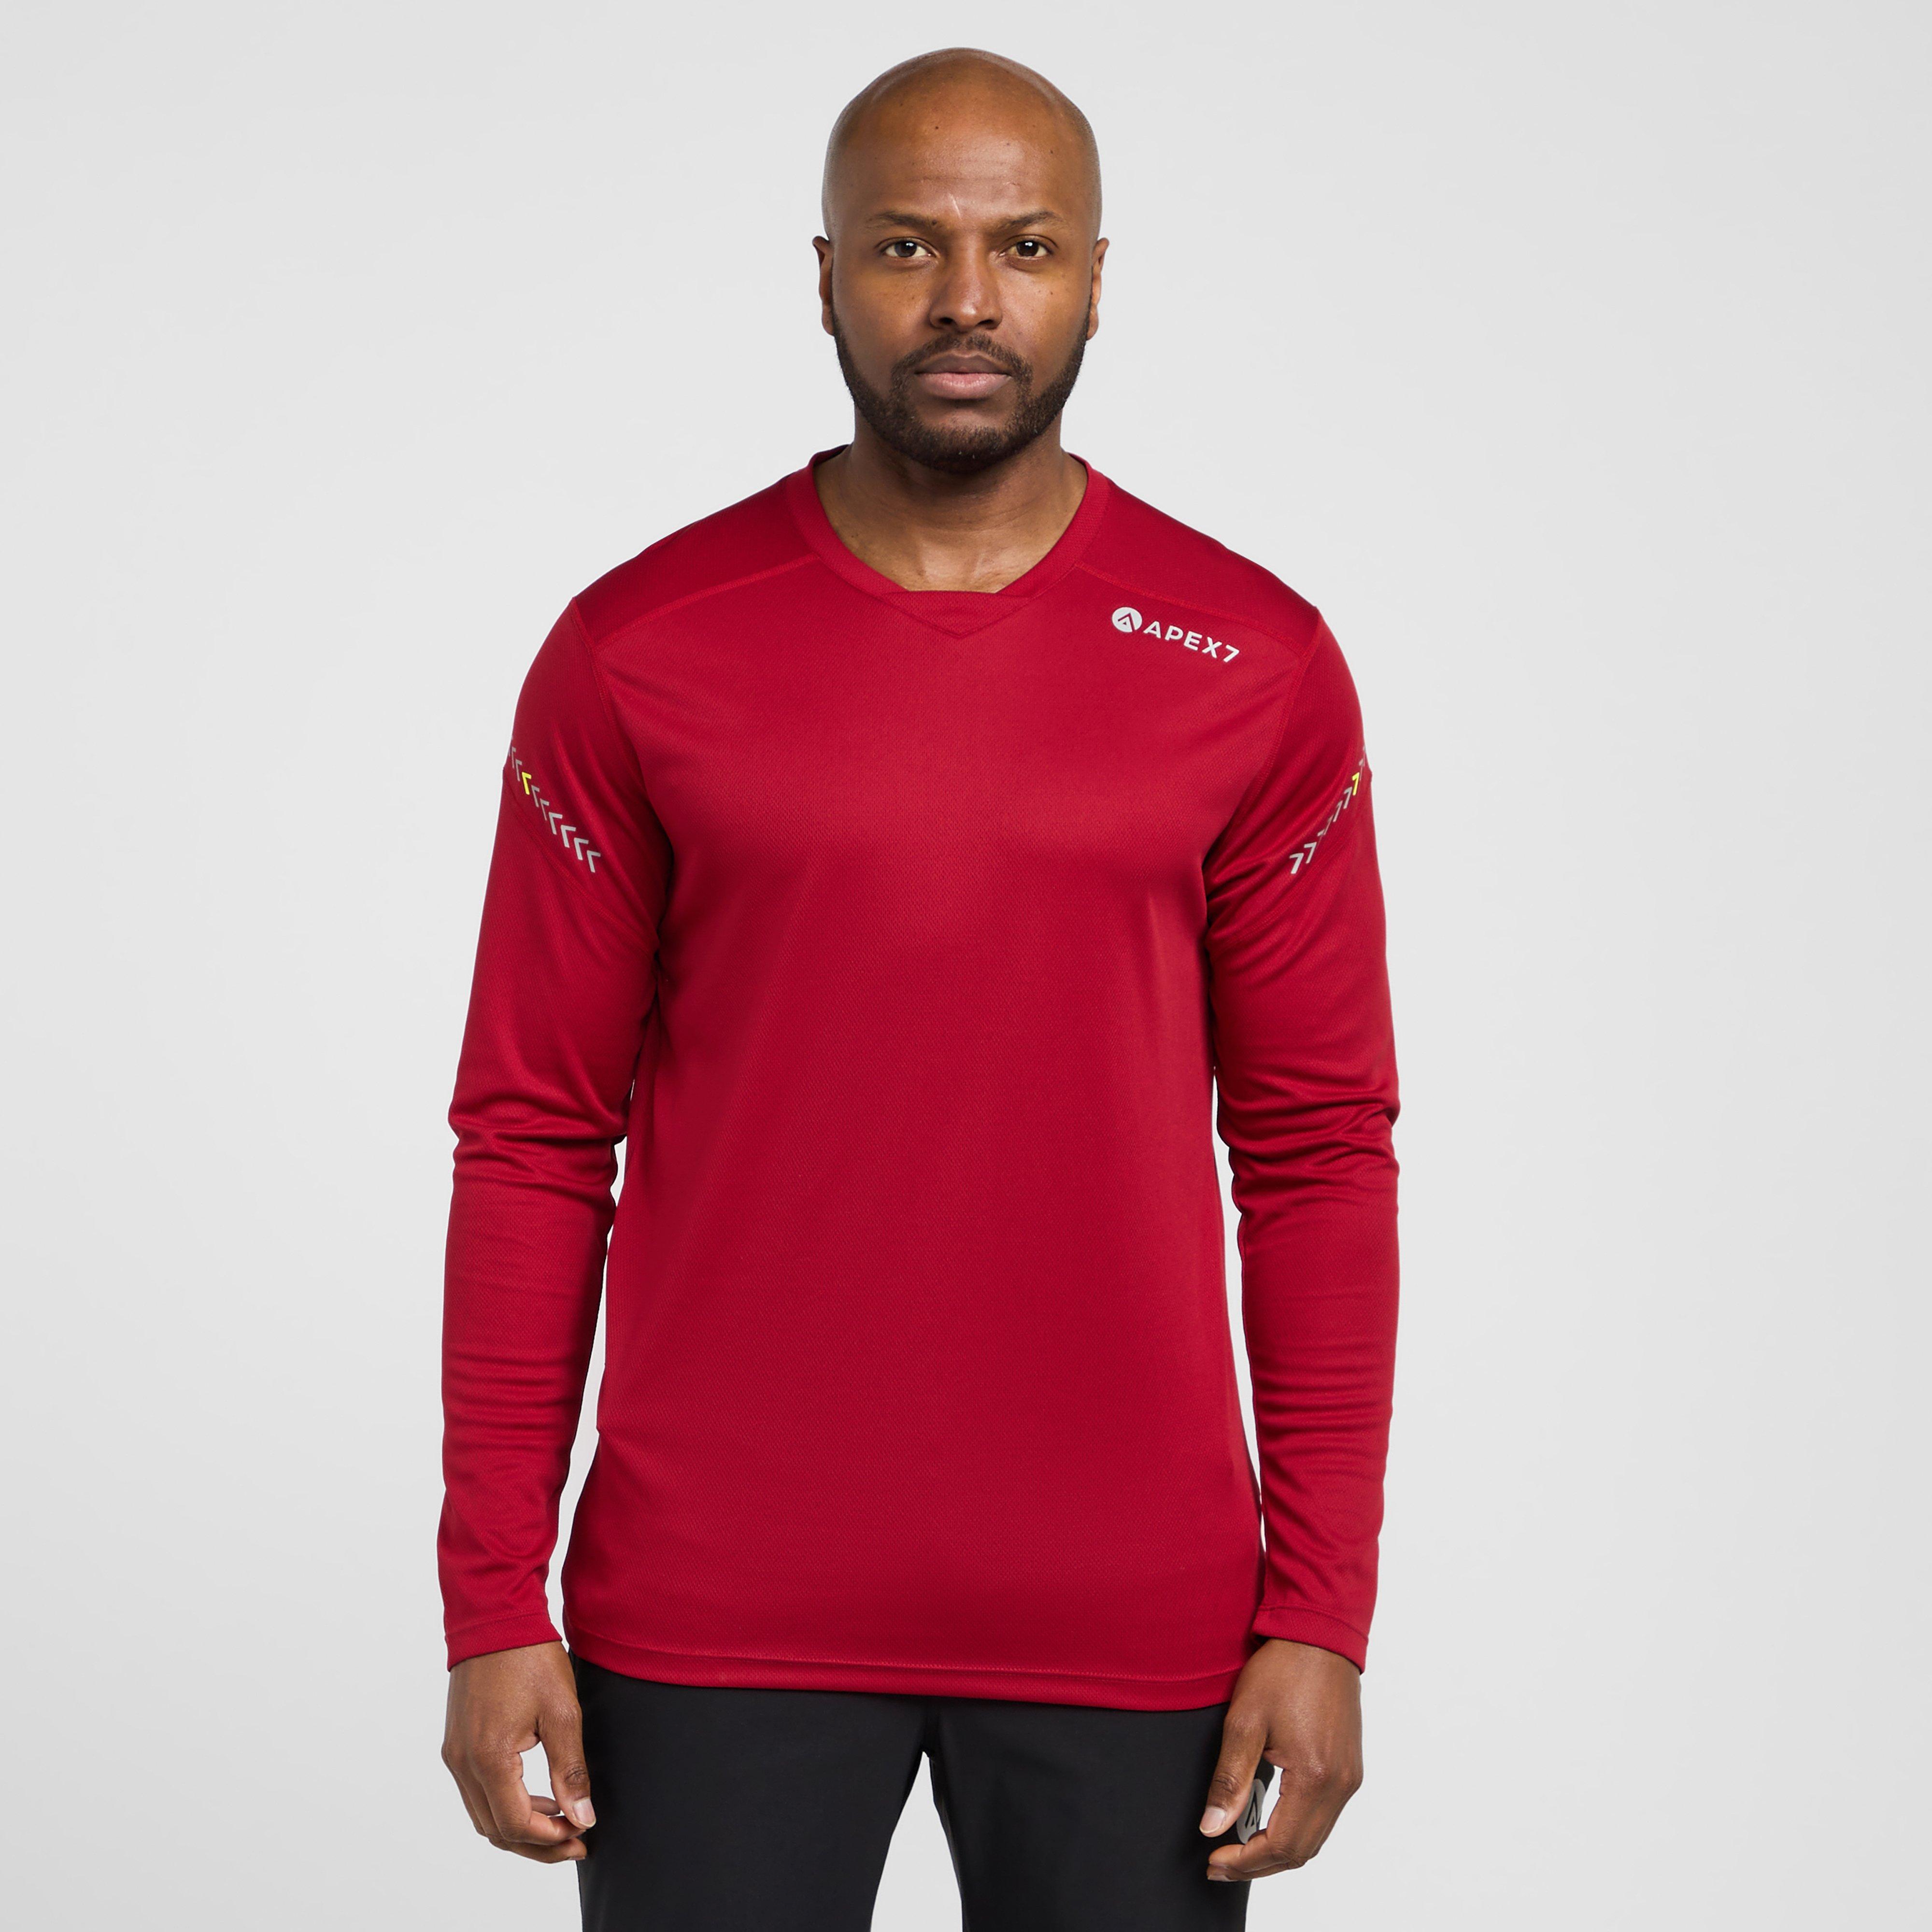  APEX7 Lithium Long Sleeve Jersey, Red